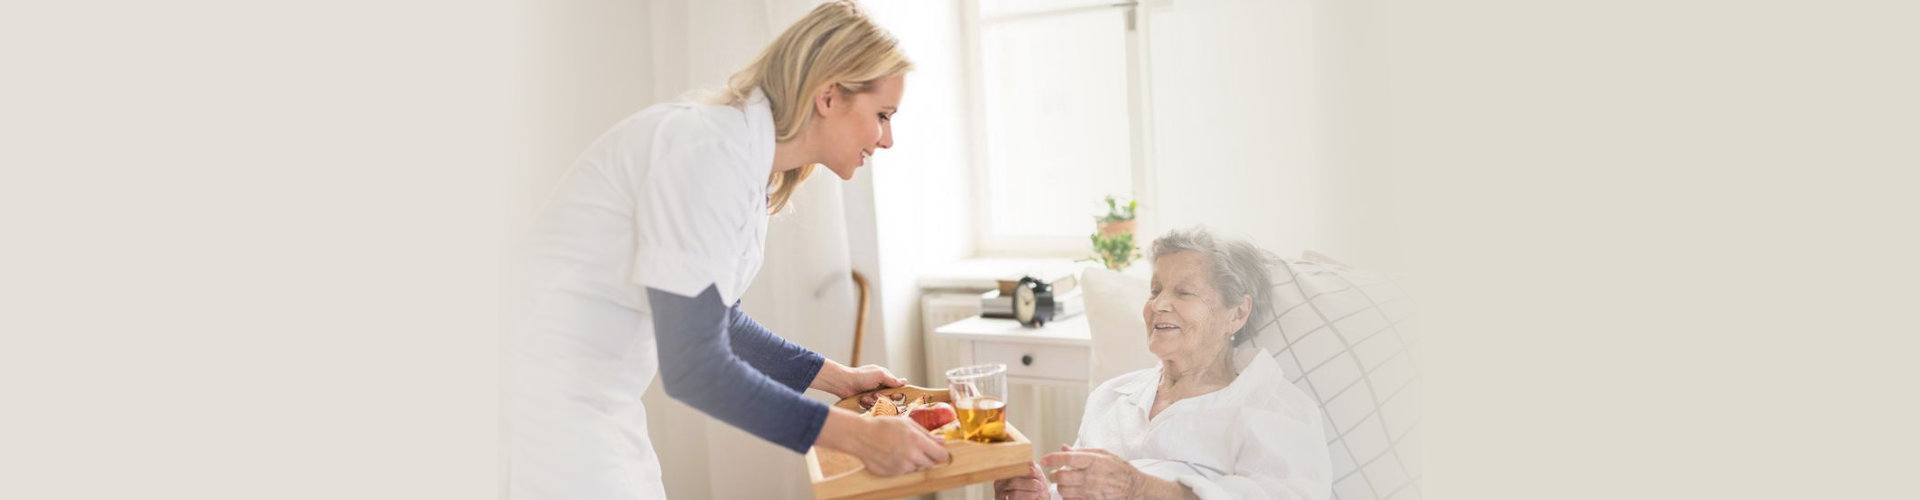 caregiver giving food to senior woman